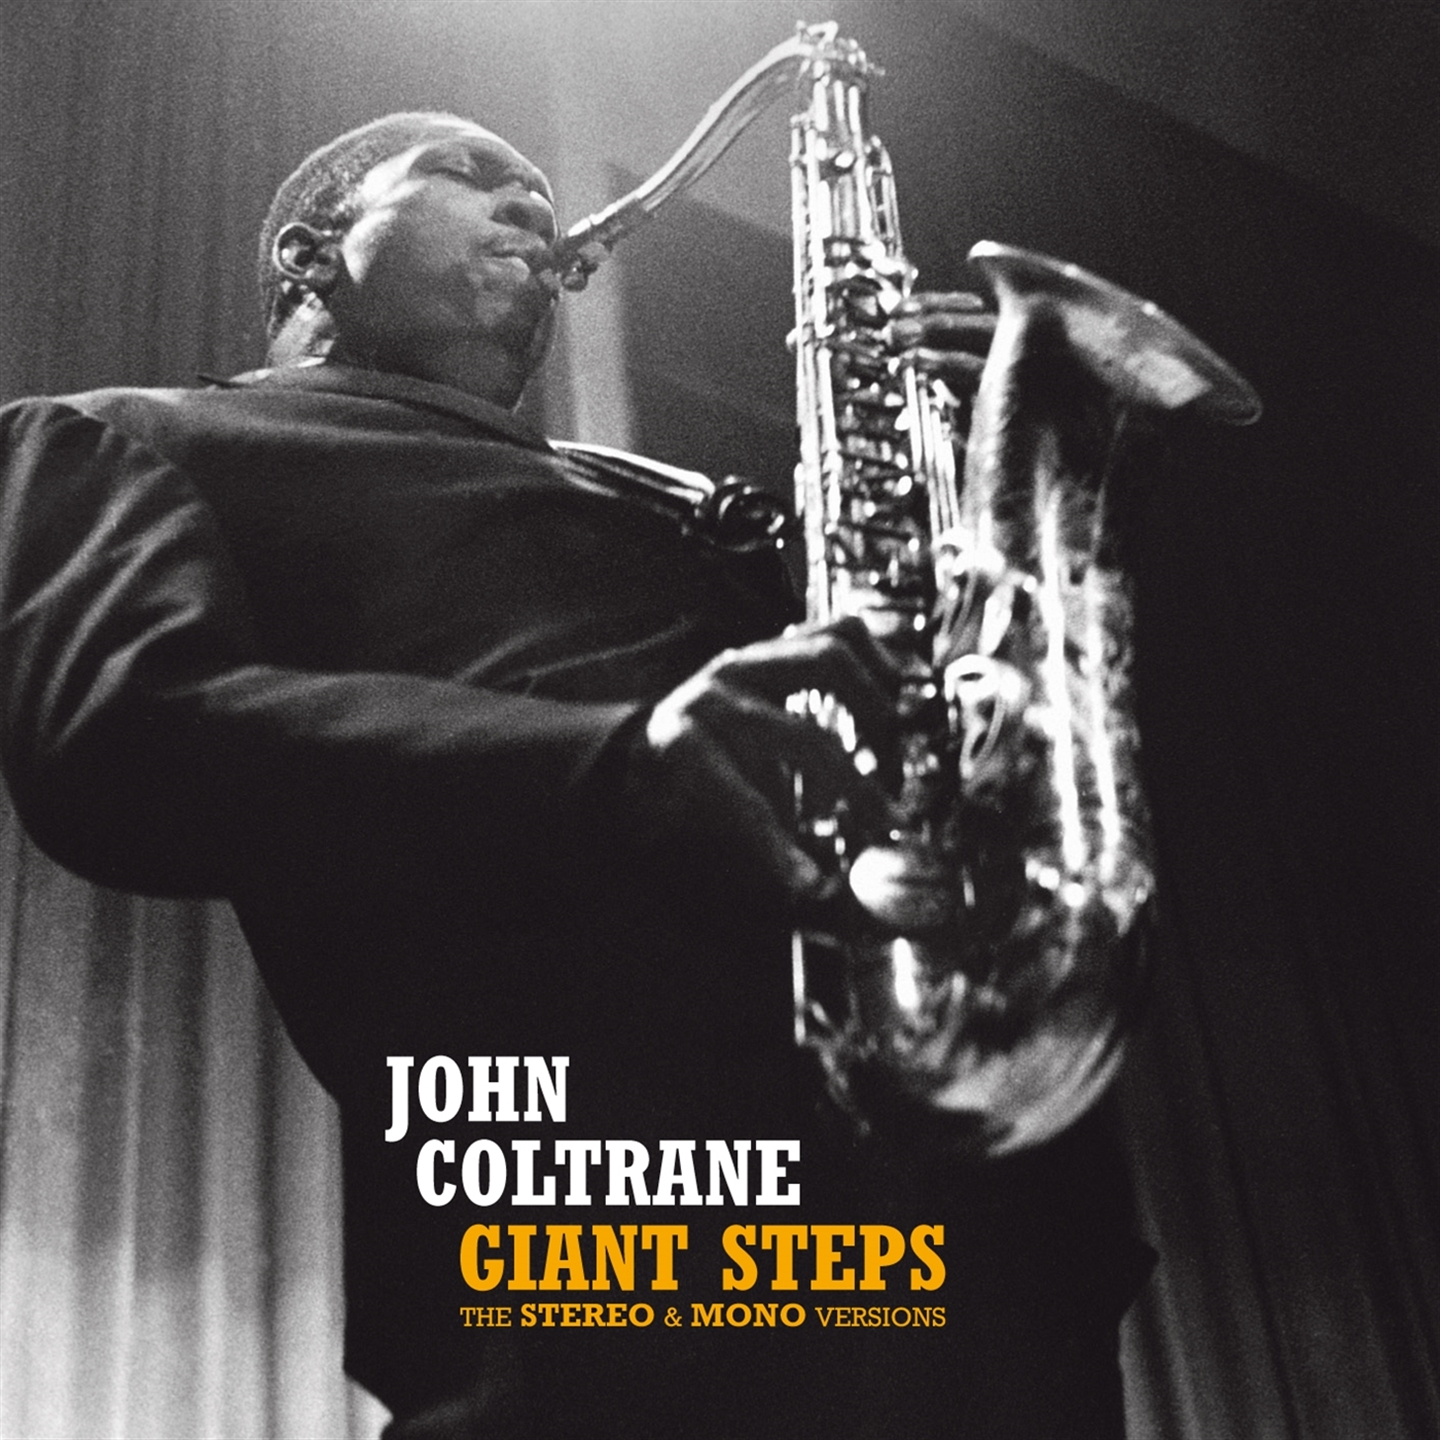 GIANT STEPS - THE STEREO & MONO VERSIONS